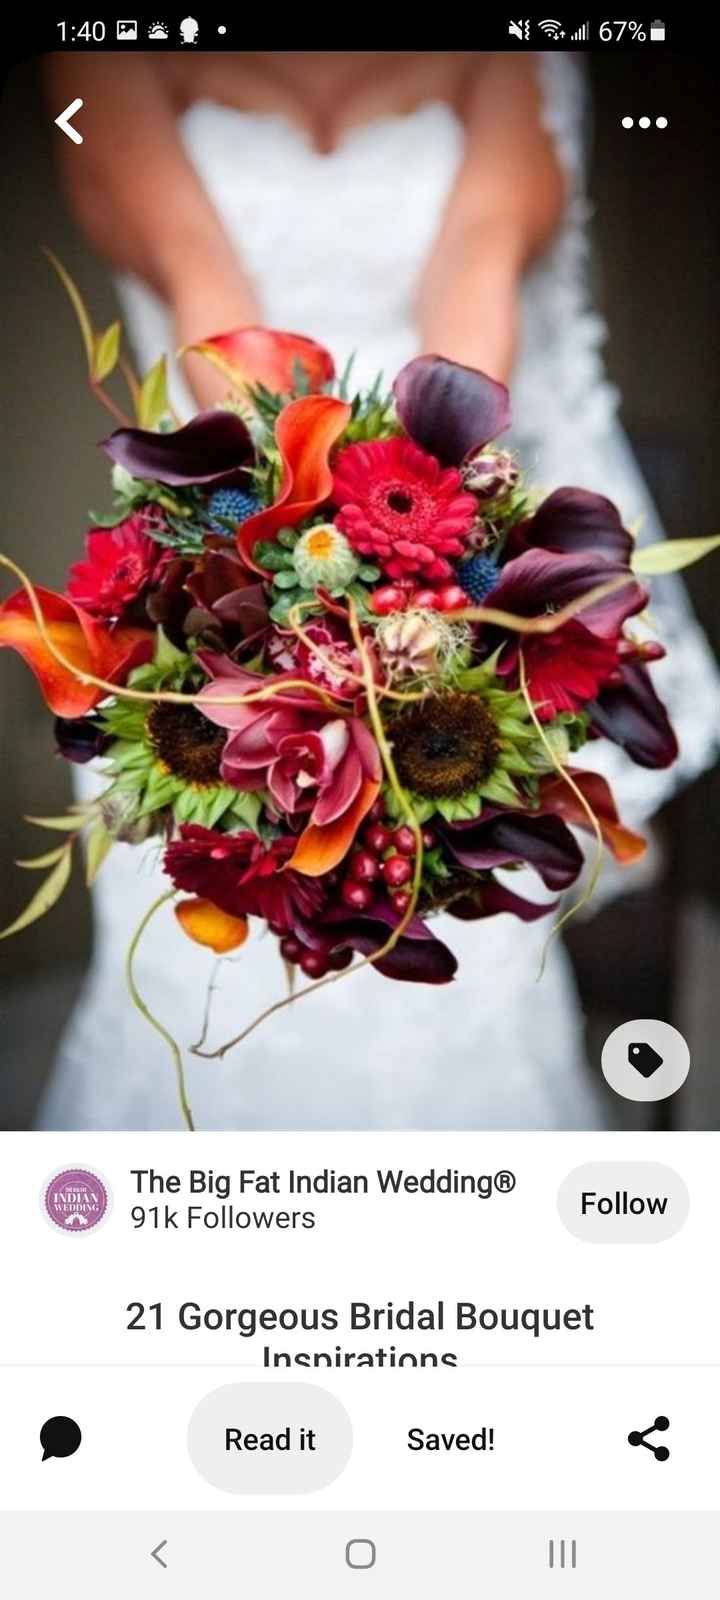 Really upset about my wedding flowers!!! Any advice?? 2